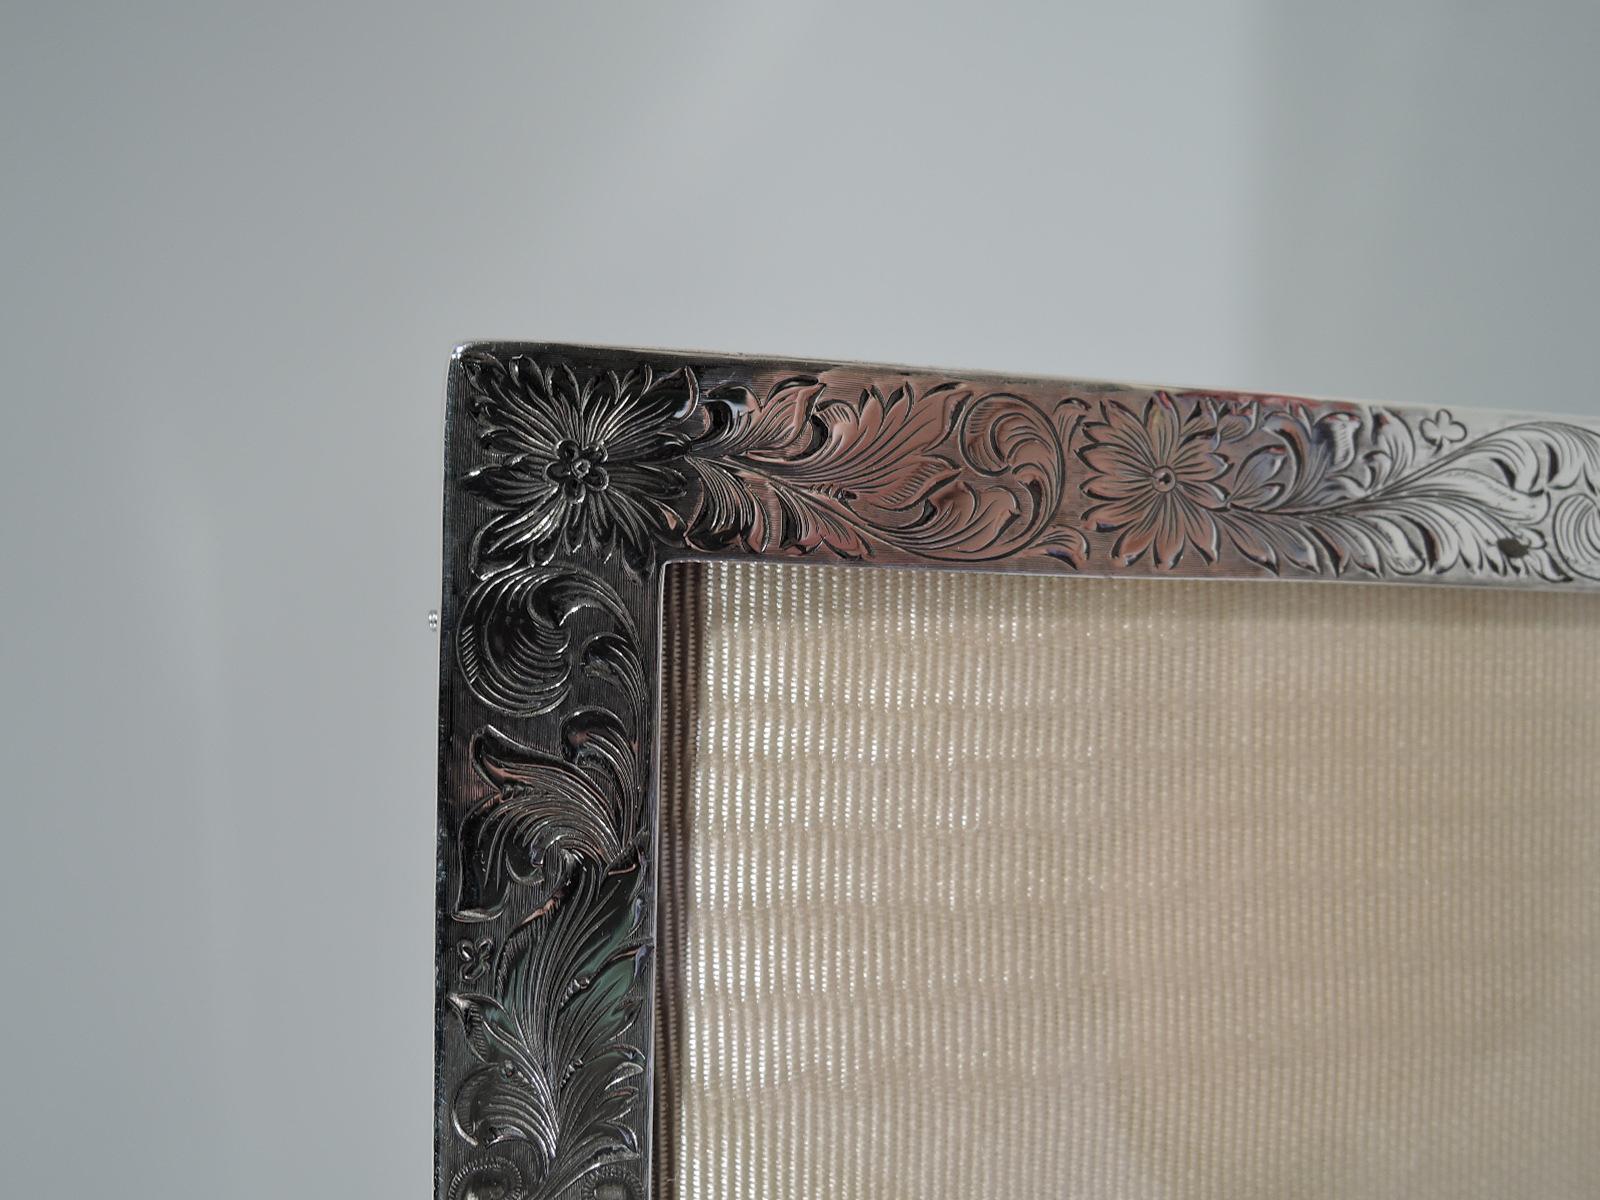 Edwardian sterling silver picture frame. Made by Meriden Britannia (a division of International) in Meriden, Conn. Rectangular window and flat surround engraved with fluid foliage and flowers. Two shaped cartouches (vacant). With glass, silk lining,